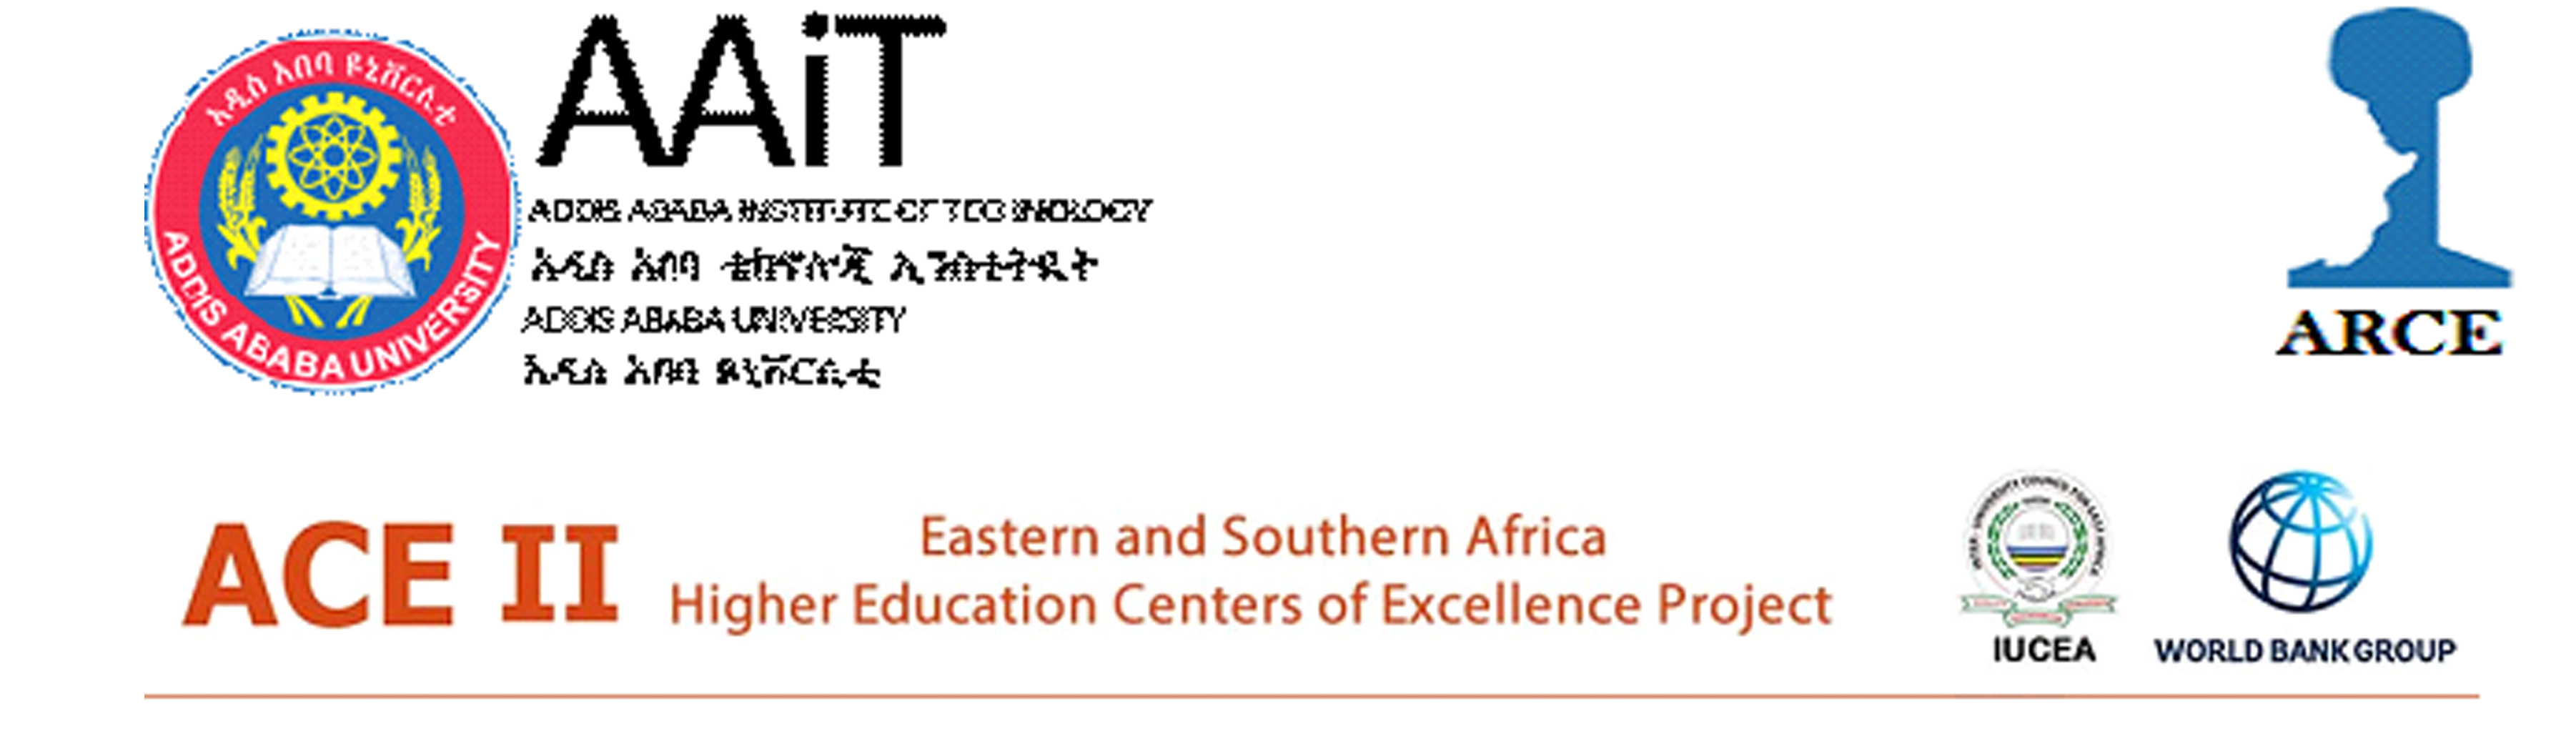 African Railway Center of Excellence (ARCE) MSc and PhD Scholarship